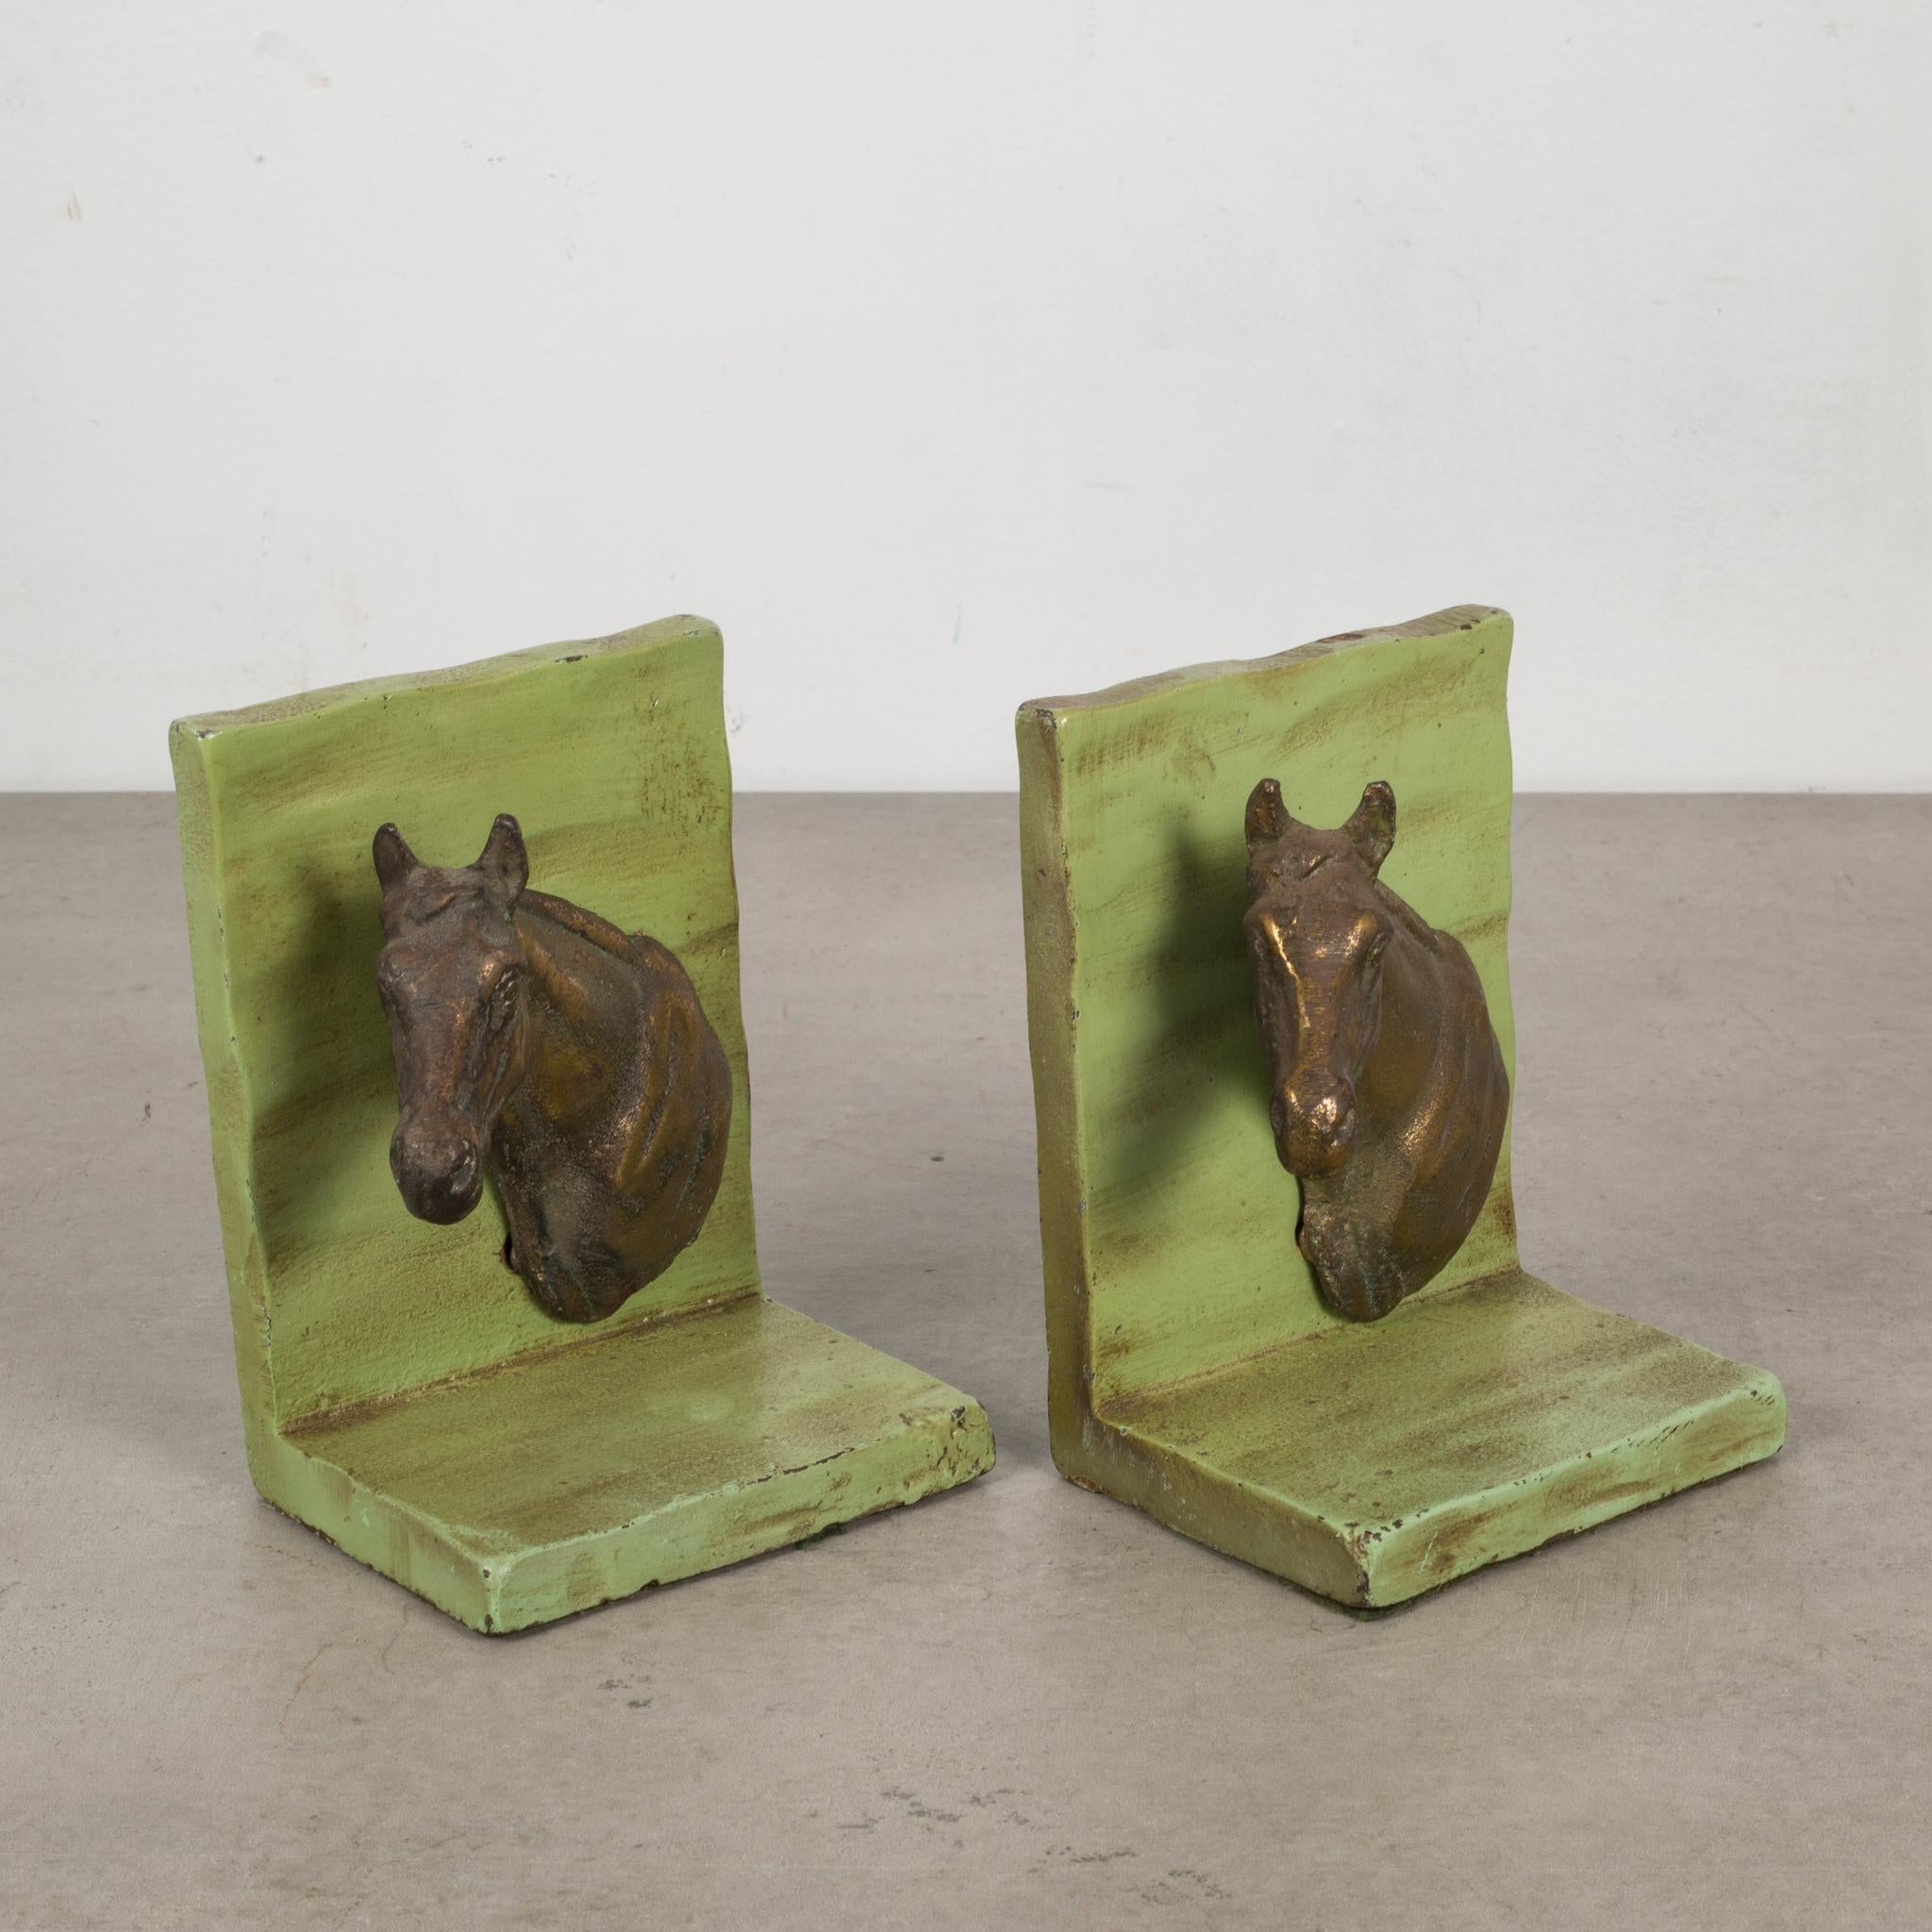 About:

This is an original pair of metal bookends with brass horses,

Creator: Unknown.
Date of manufacture: circa 1940-1950.
Materials and techniques: Metal, brass.
Condition: Good. Wear consistent with age and use.
Dimensions: H 5 in. x W